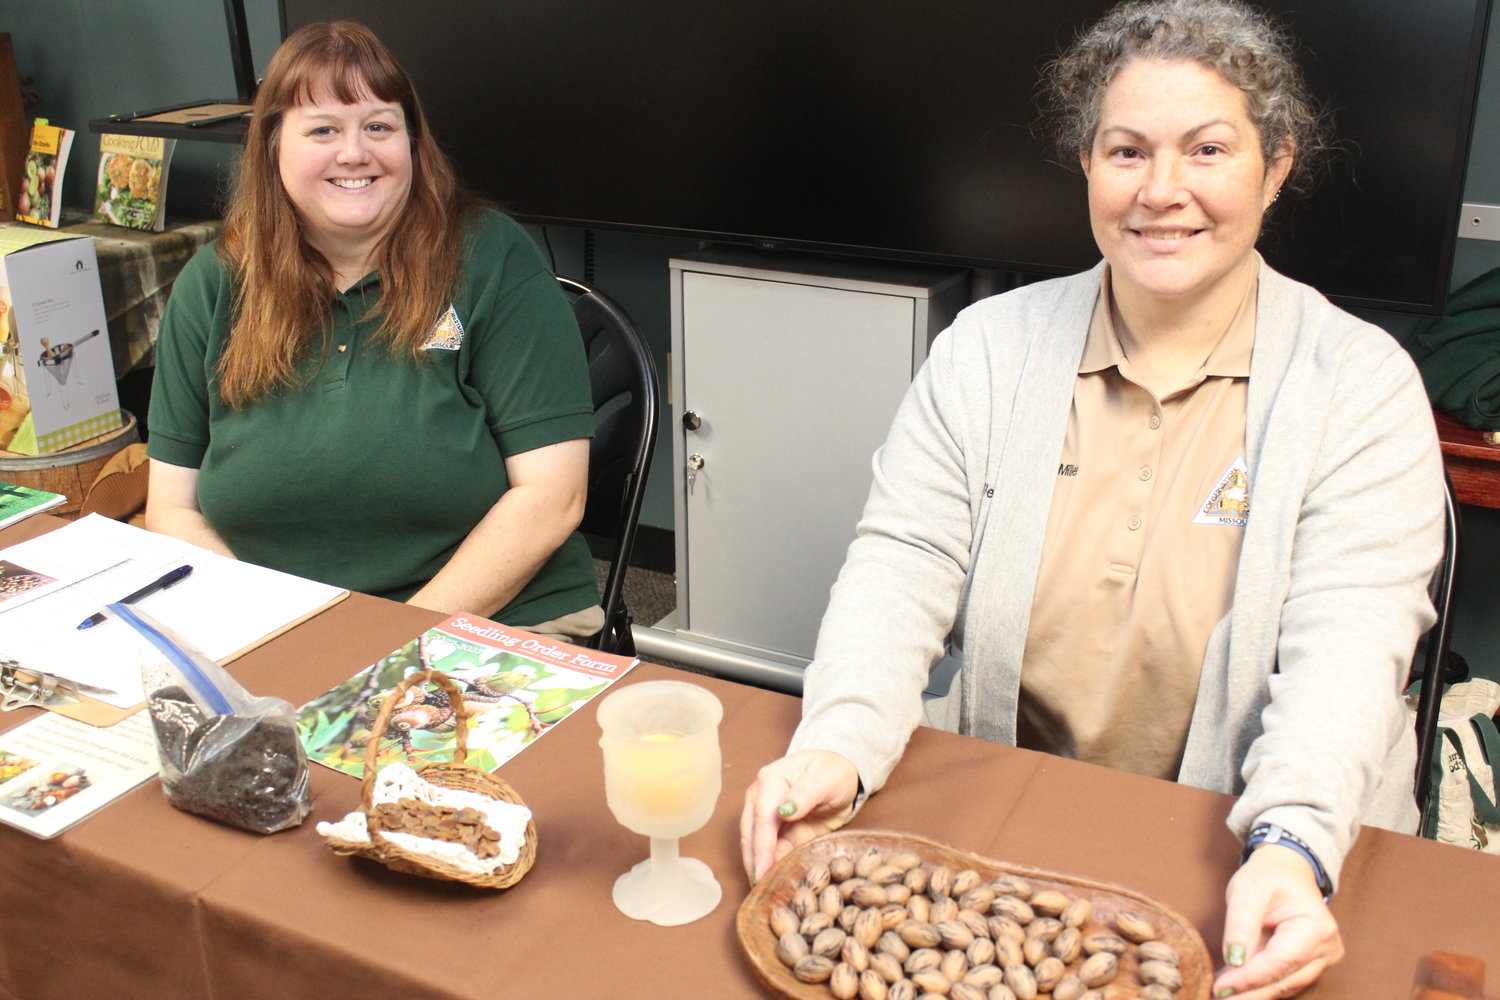 DINNER PLUCKED FROM A TREE, was presented at the Missouri Department of Conservation office in Clinton and Lost Valley Hatchery in Warsaw. Kara Entrop and Ginger Miller prepared a variety of items from native trees including cookies and fudge.